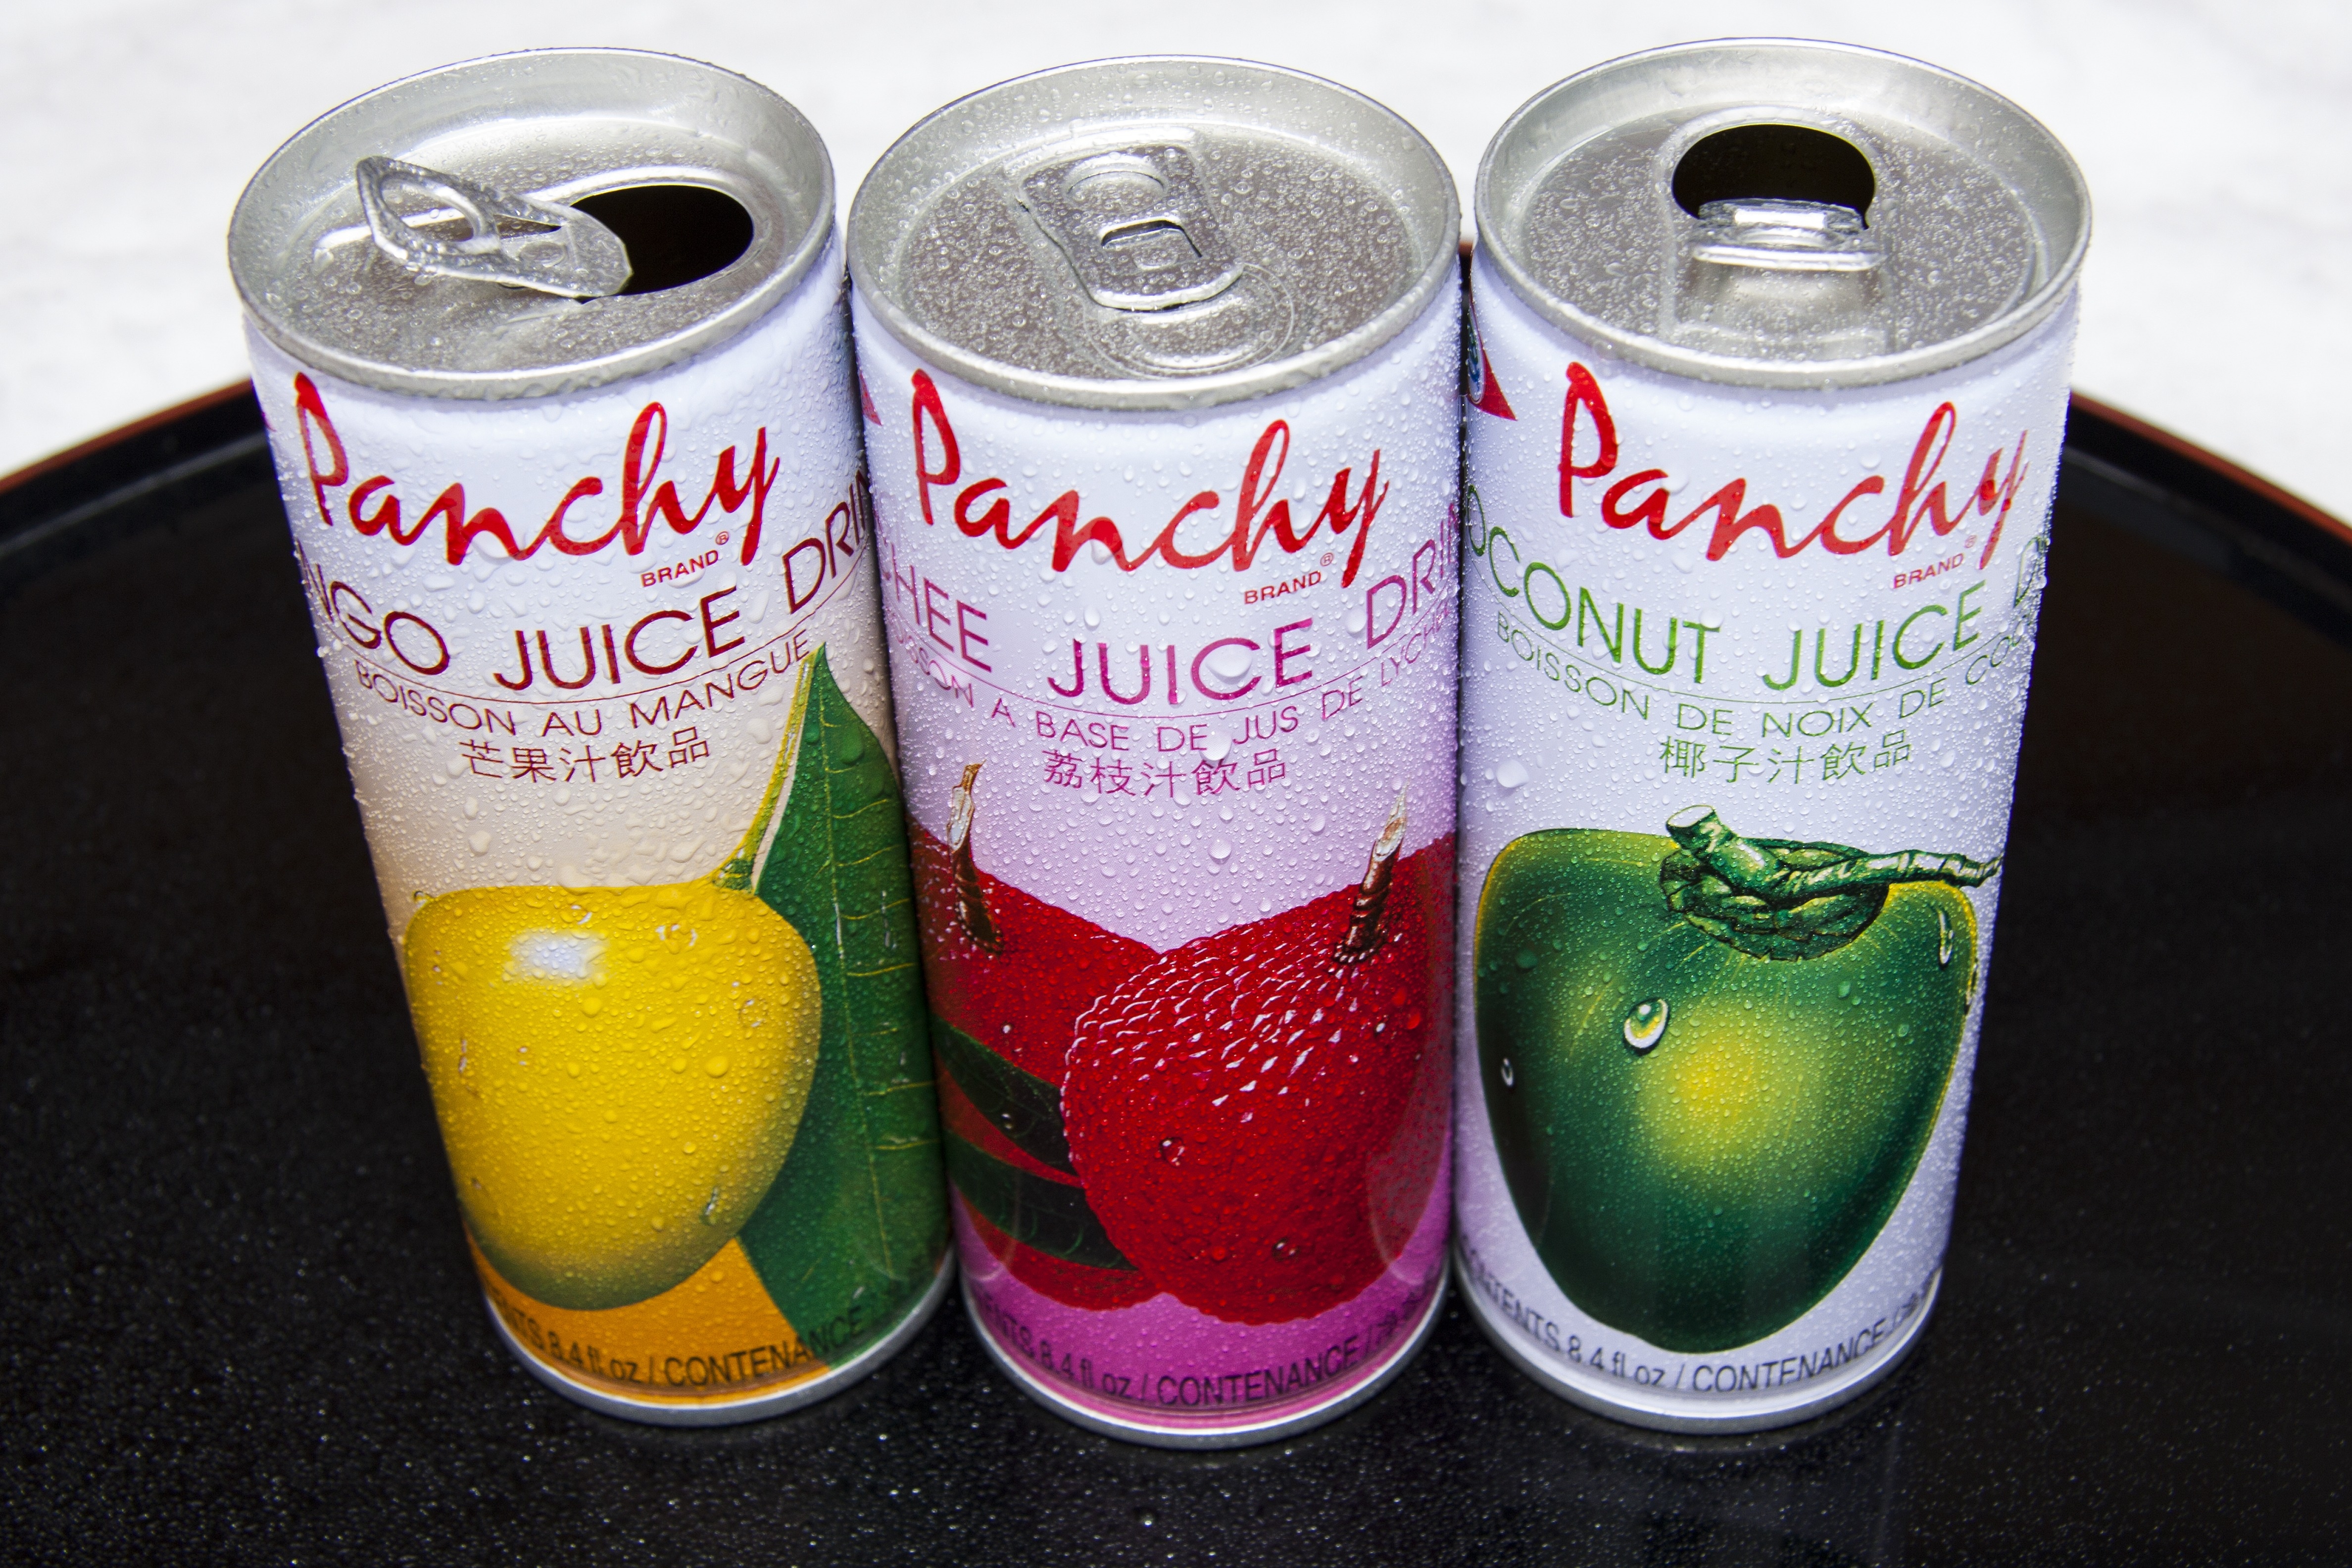 3 panchy juice drink cans